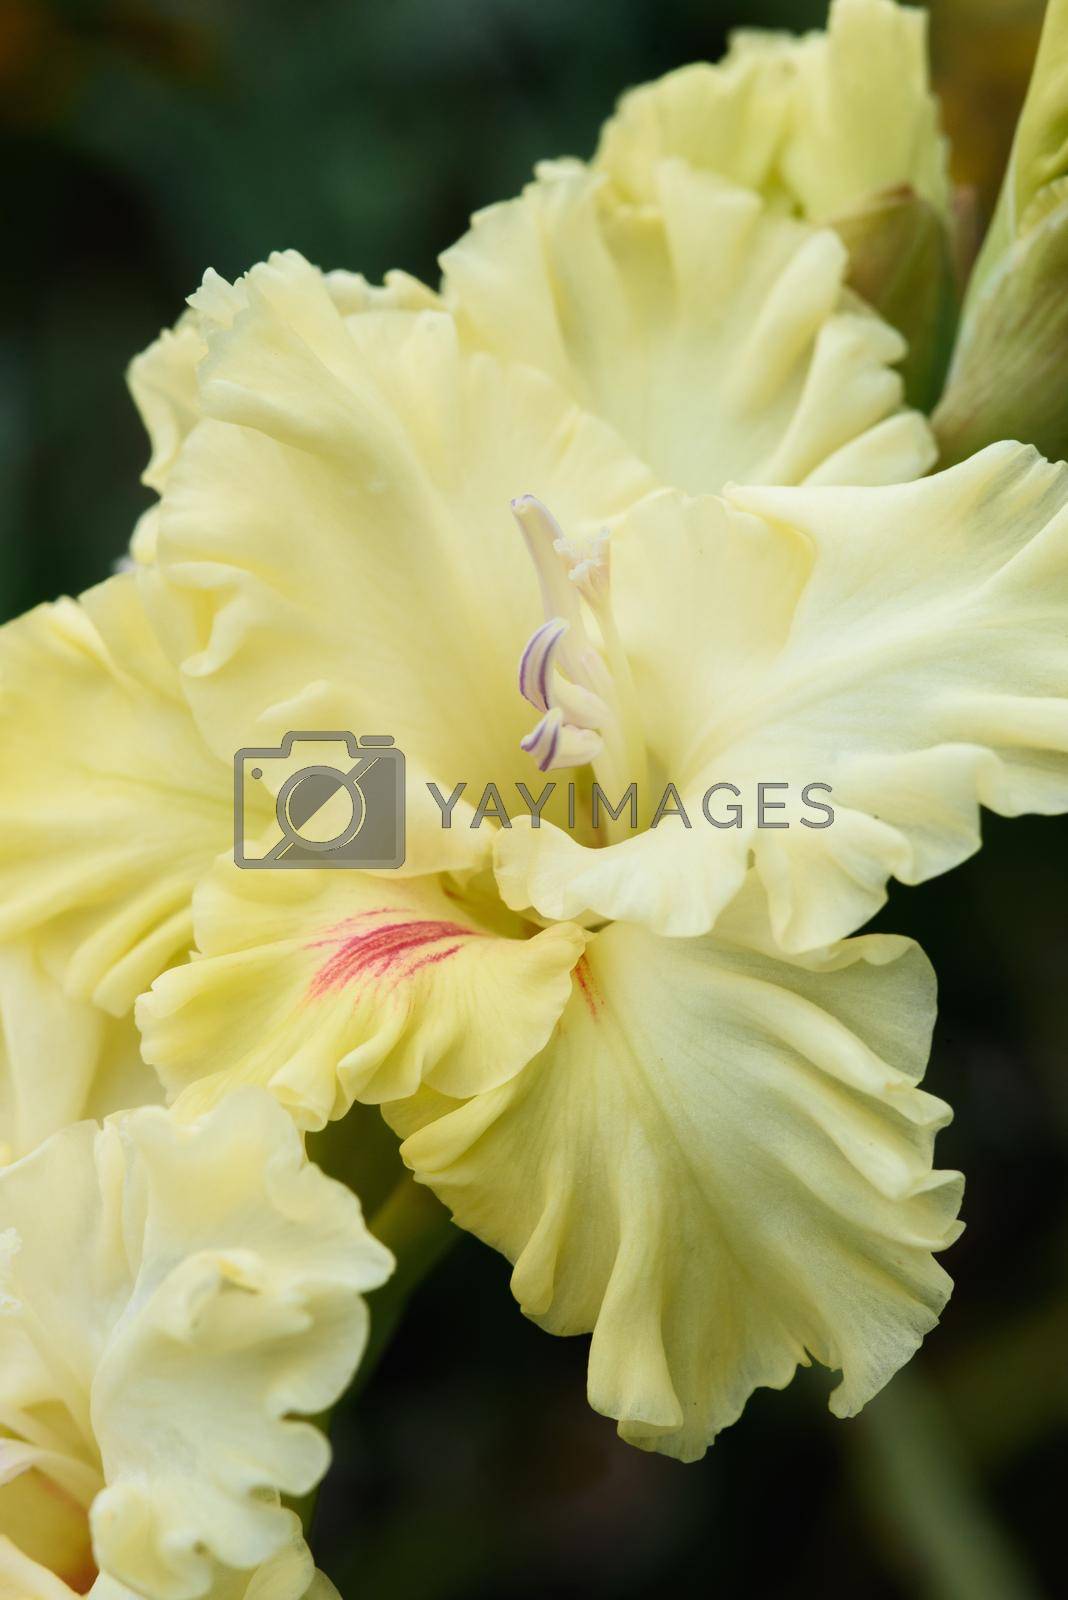 Royalty free image of Gladiolus inflorescence with pistils and stamens in detail  by oracal